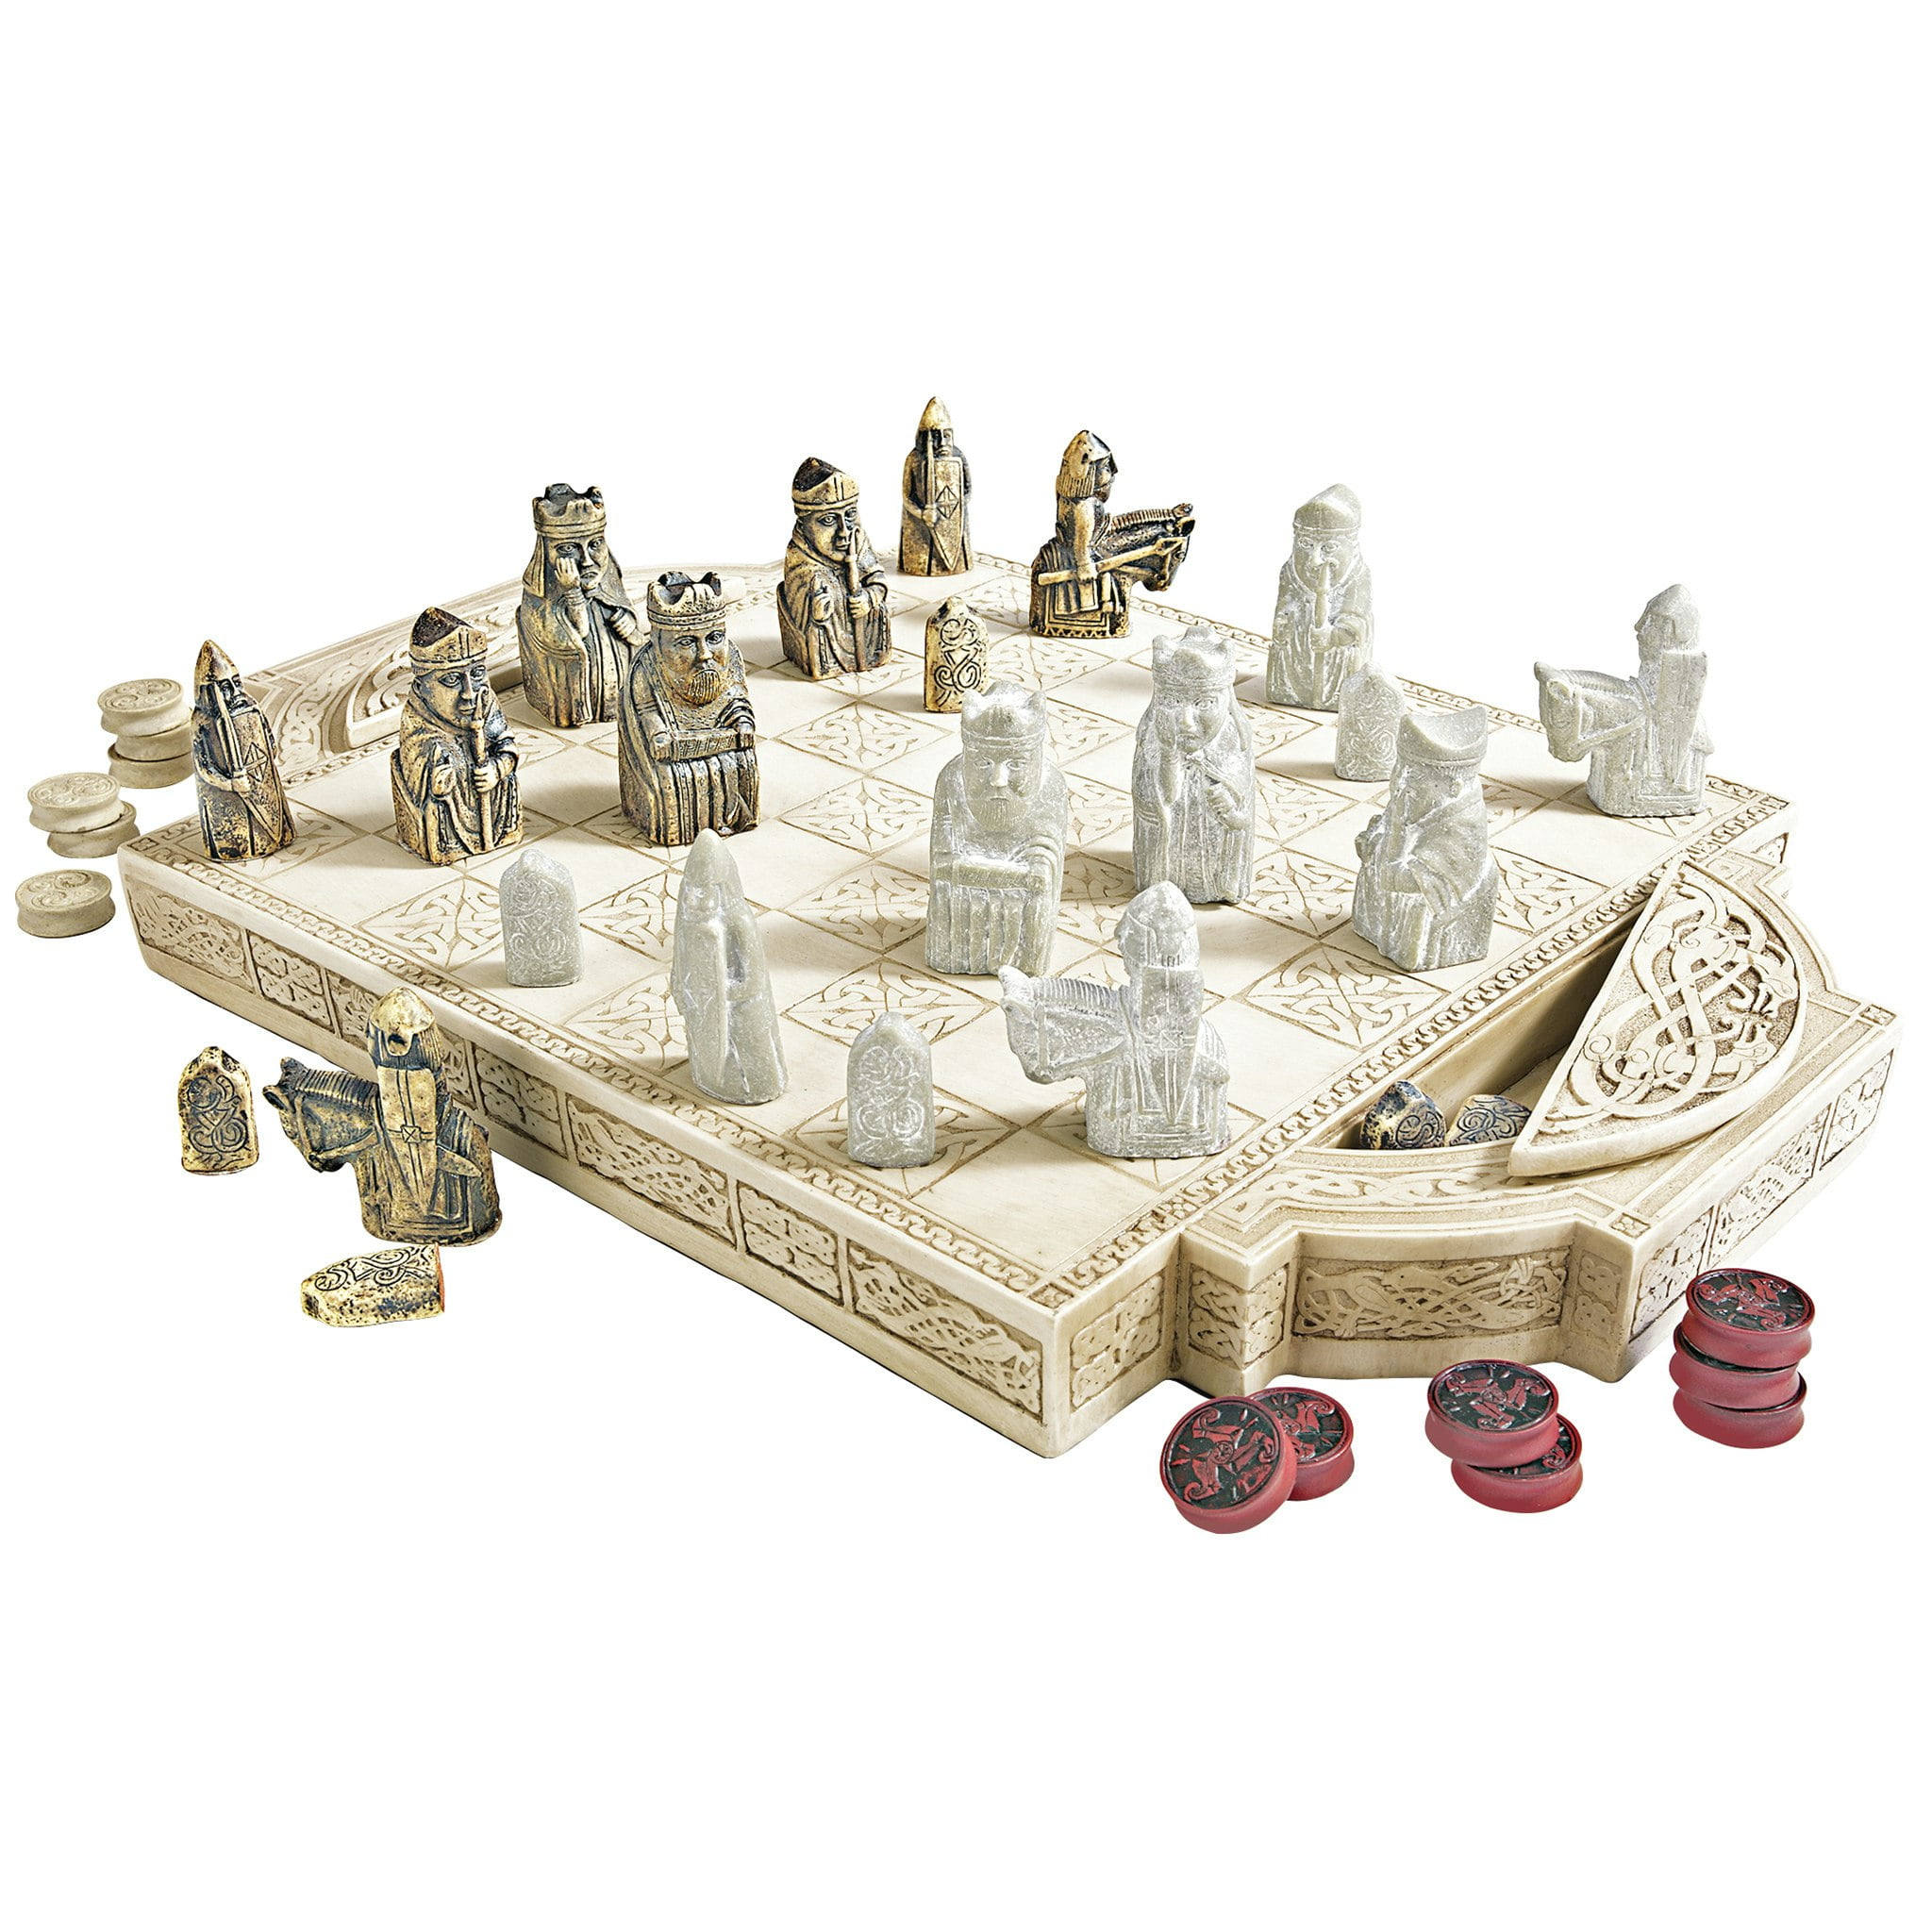 Chess Ultra: Isle of Lewis chess set for Nintendo Switch